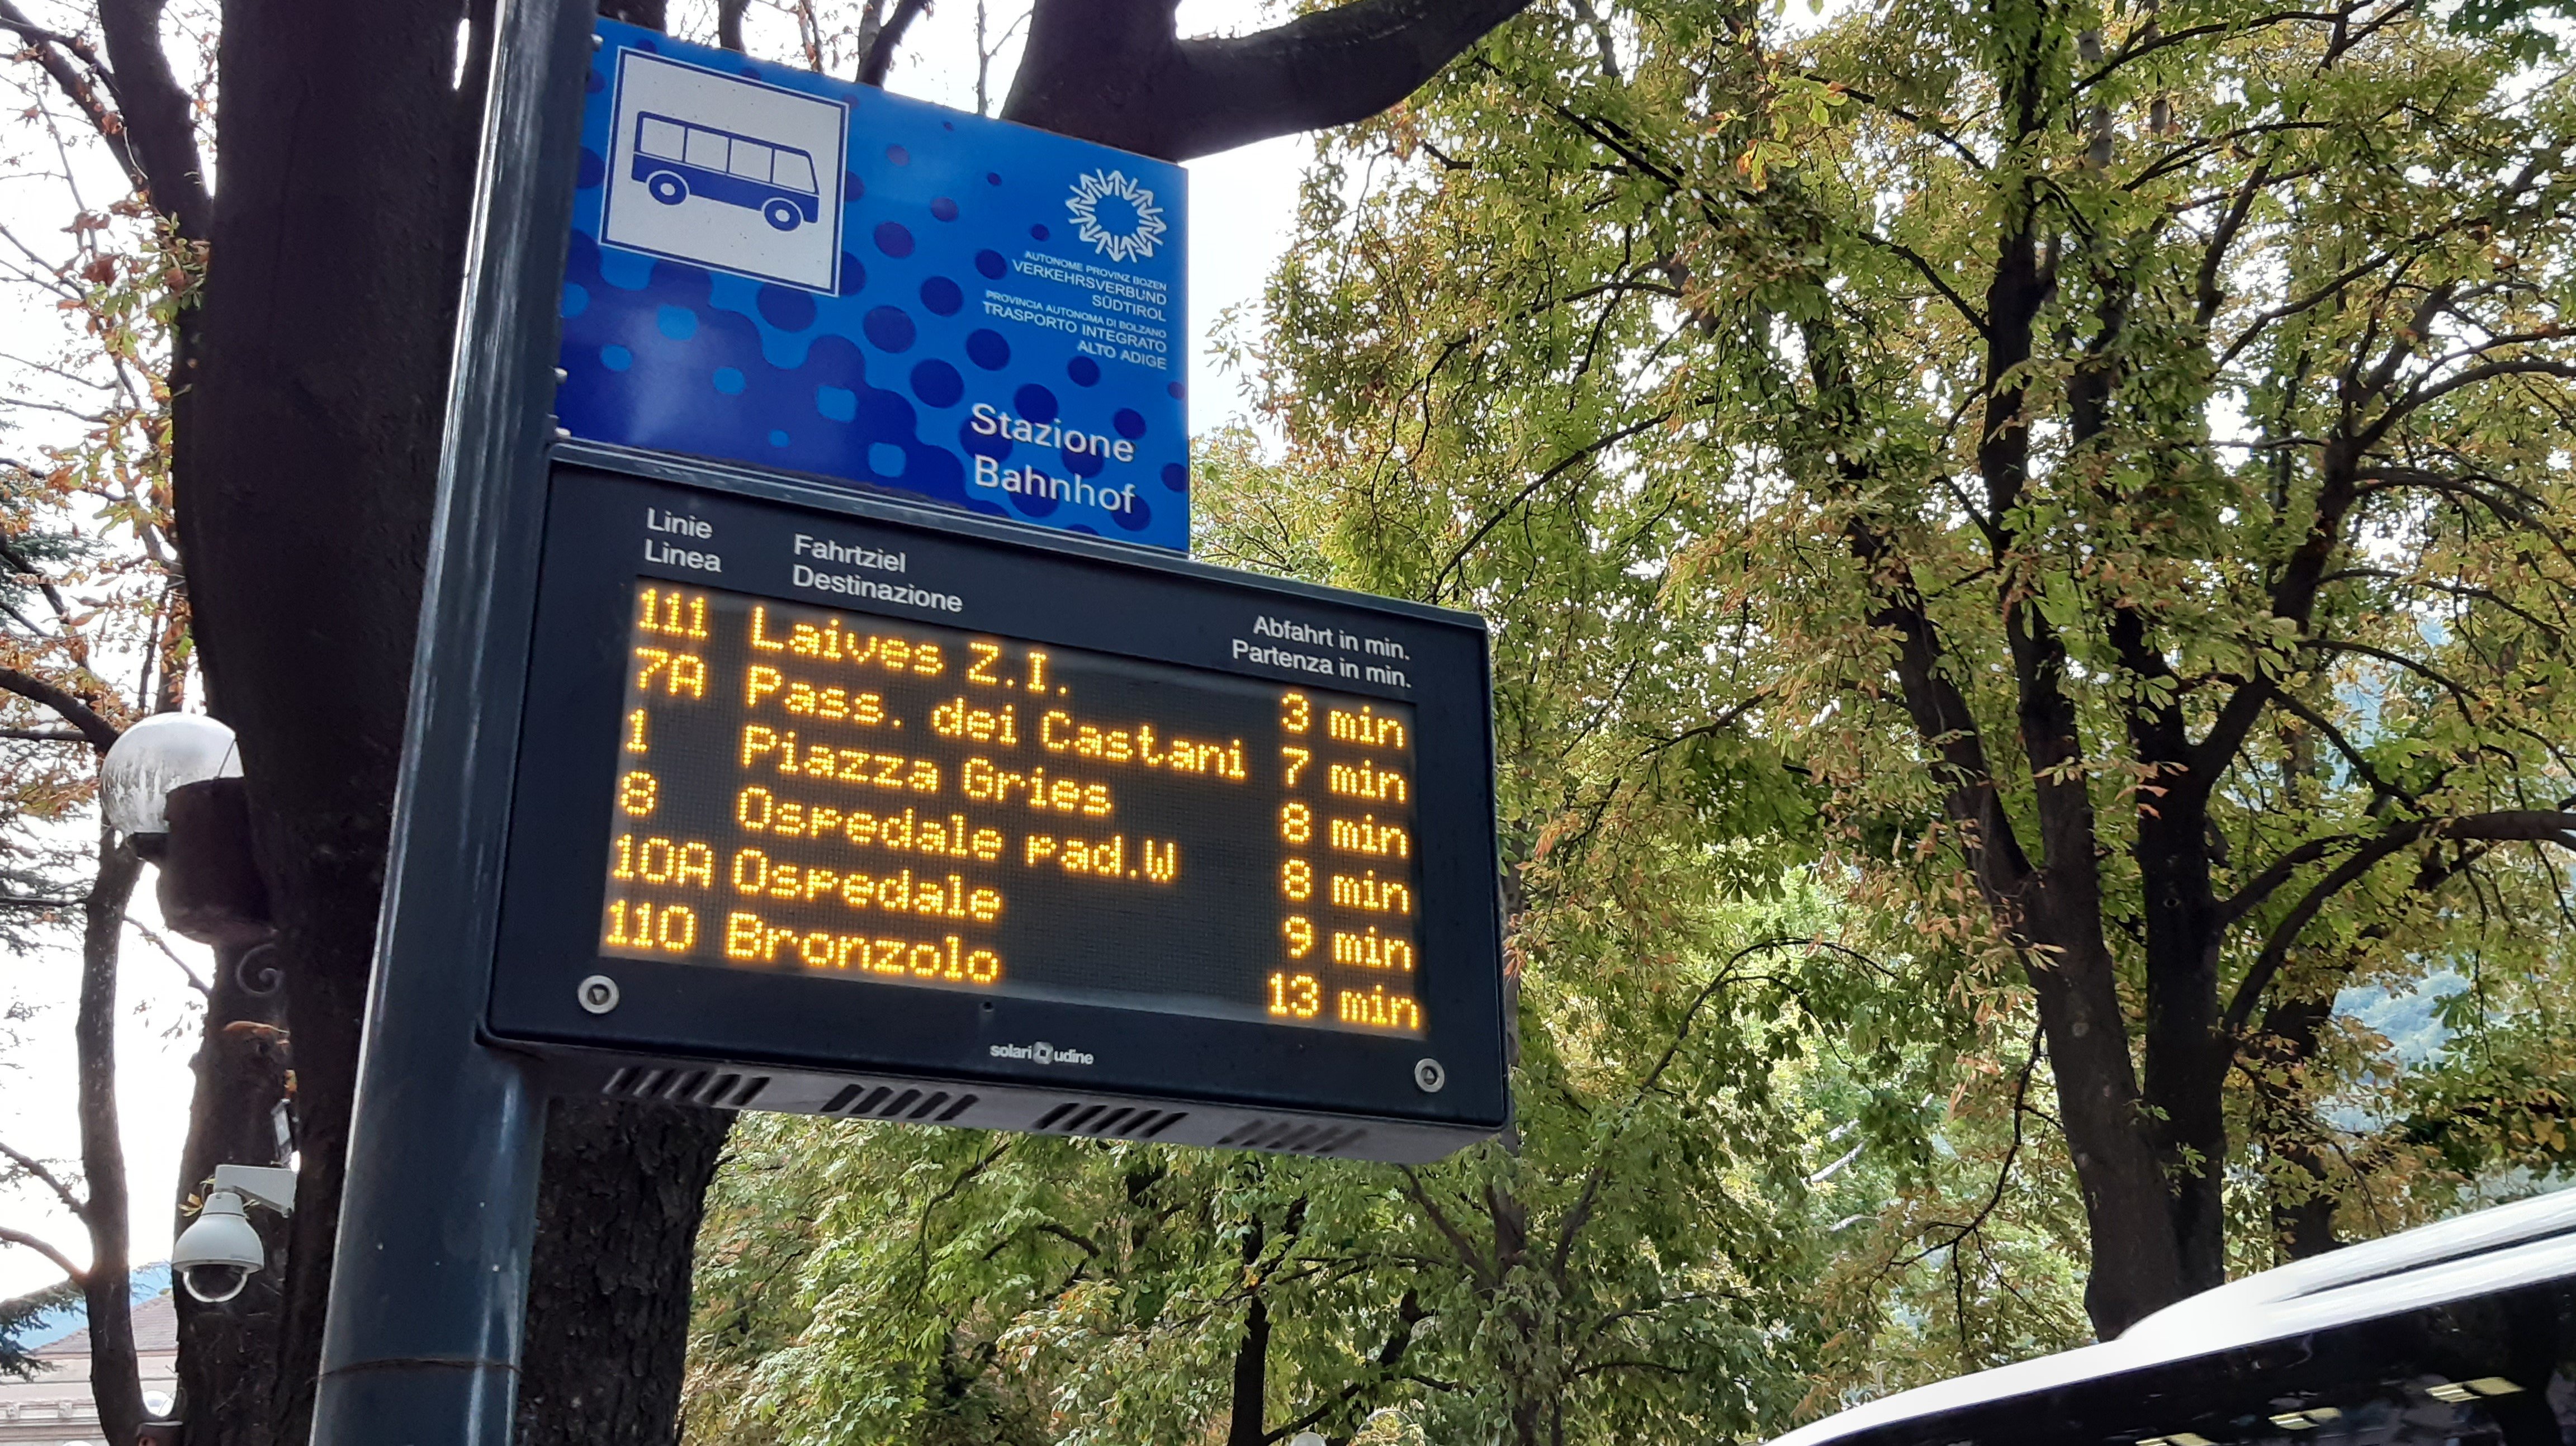 Bus stop with digital passenger information